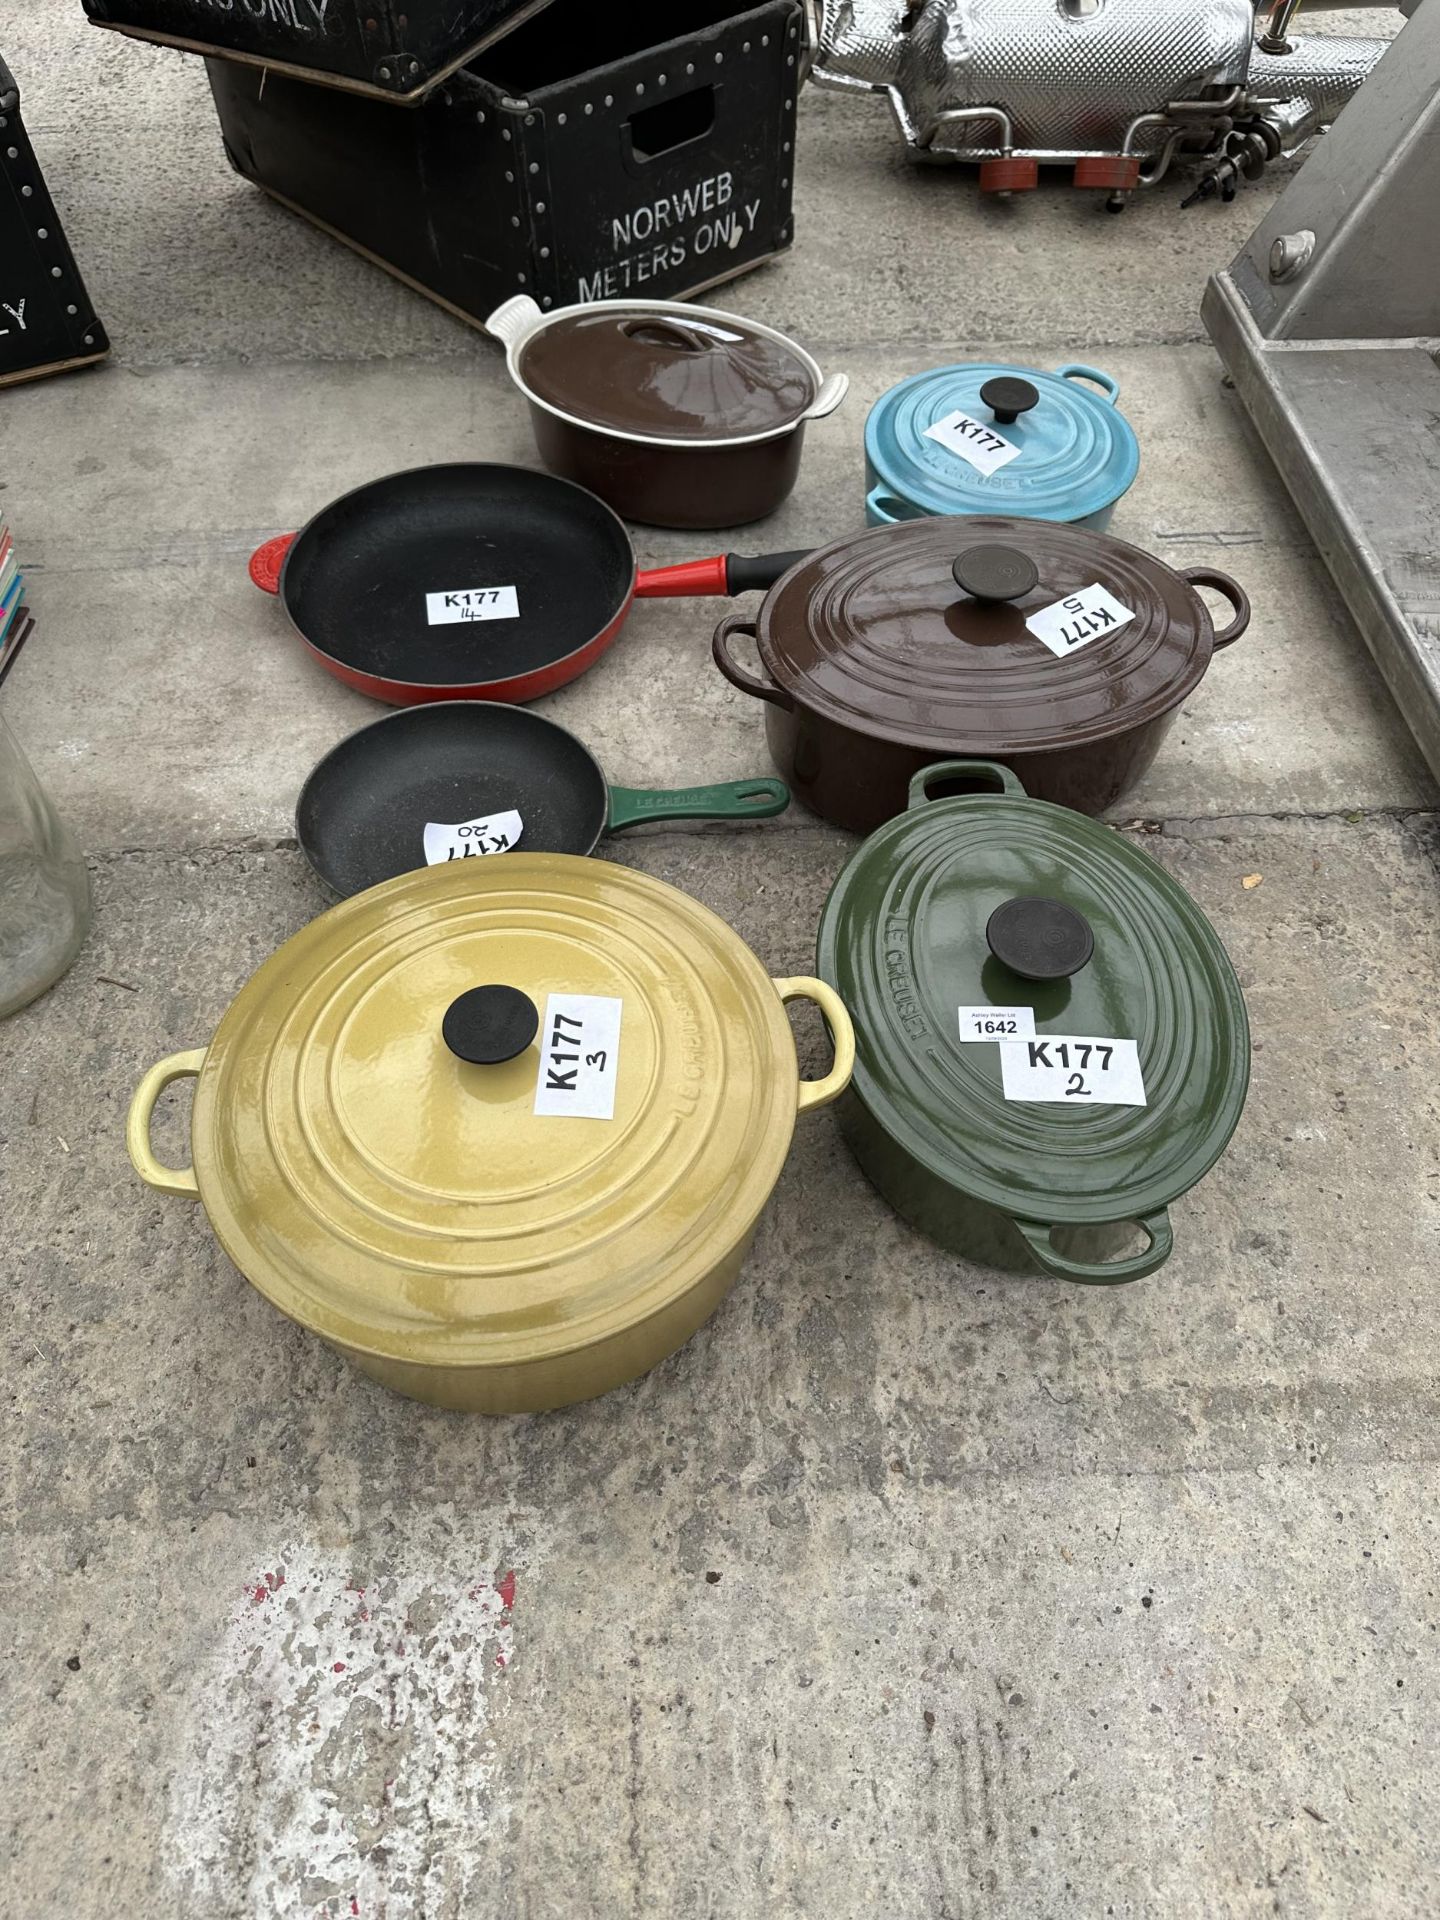 AN ASSORTMENT OF COLOURED LE CREUSET PANS TO INCLUDE CASAROLE DISHES AND FRYING PANS ETC